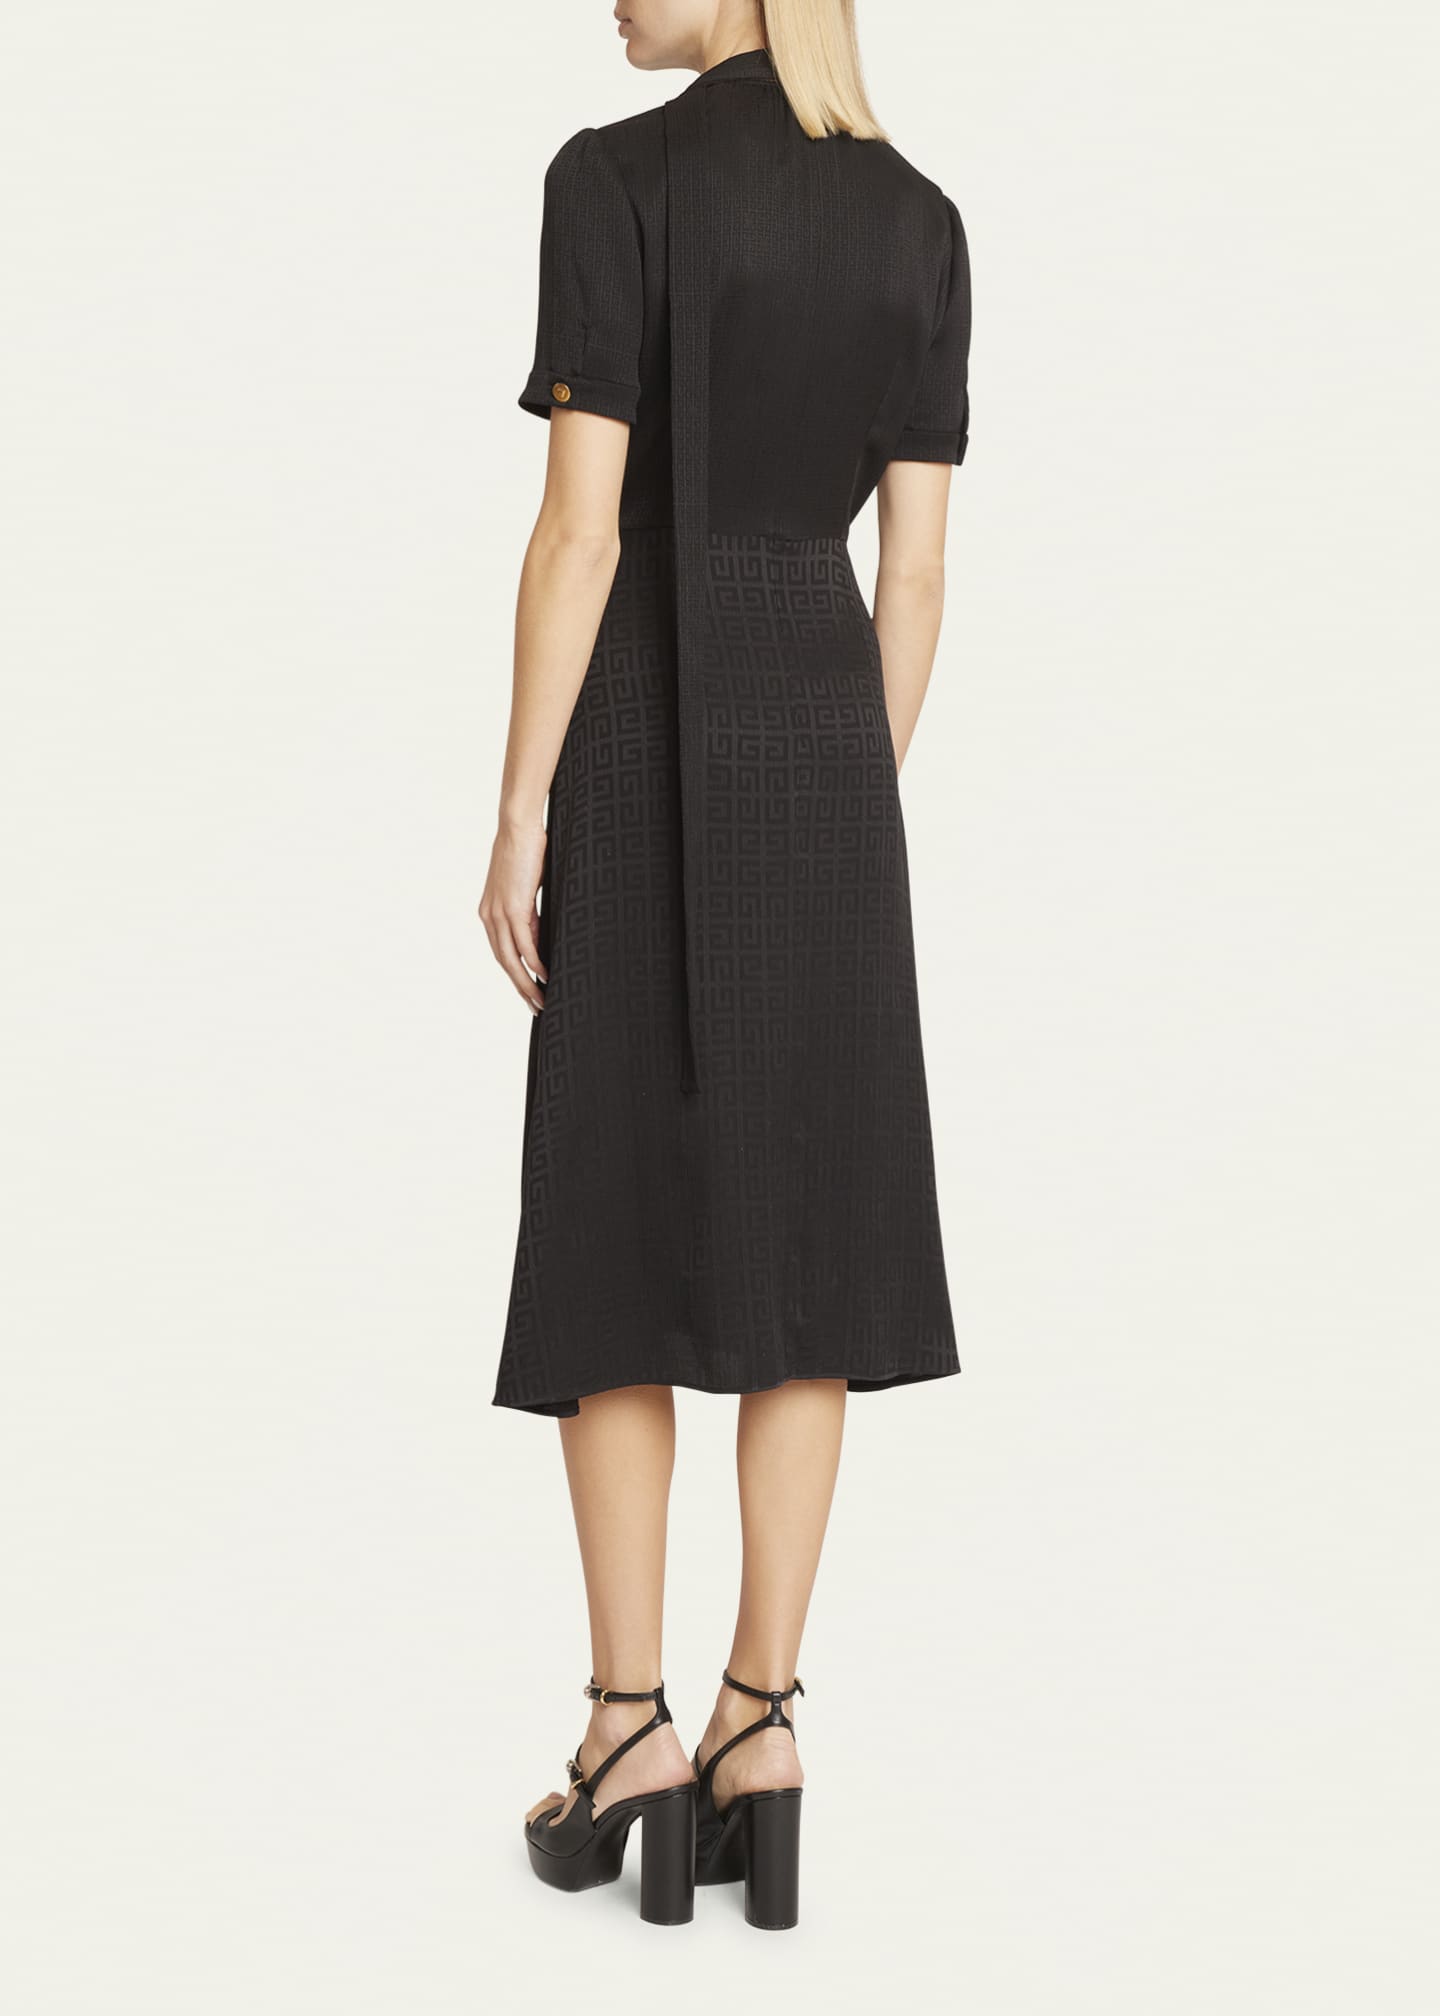 Givenchy Lavaliere 4G Print Midi Dress with Self-Tie Collar - Bergdorf ...